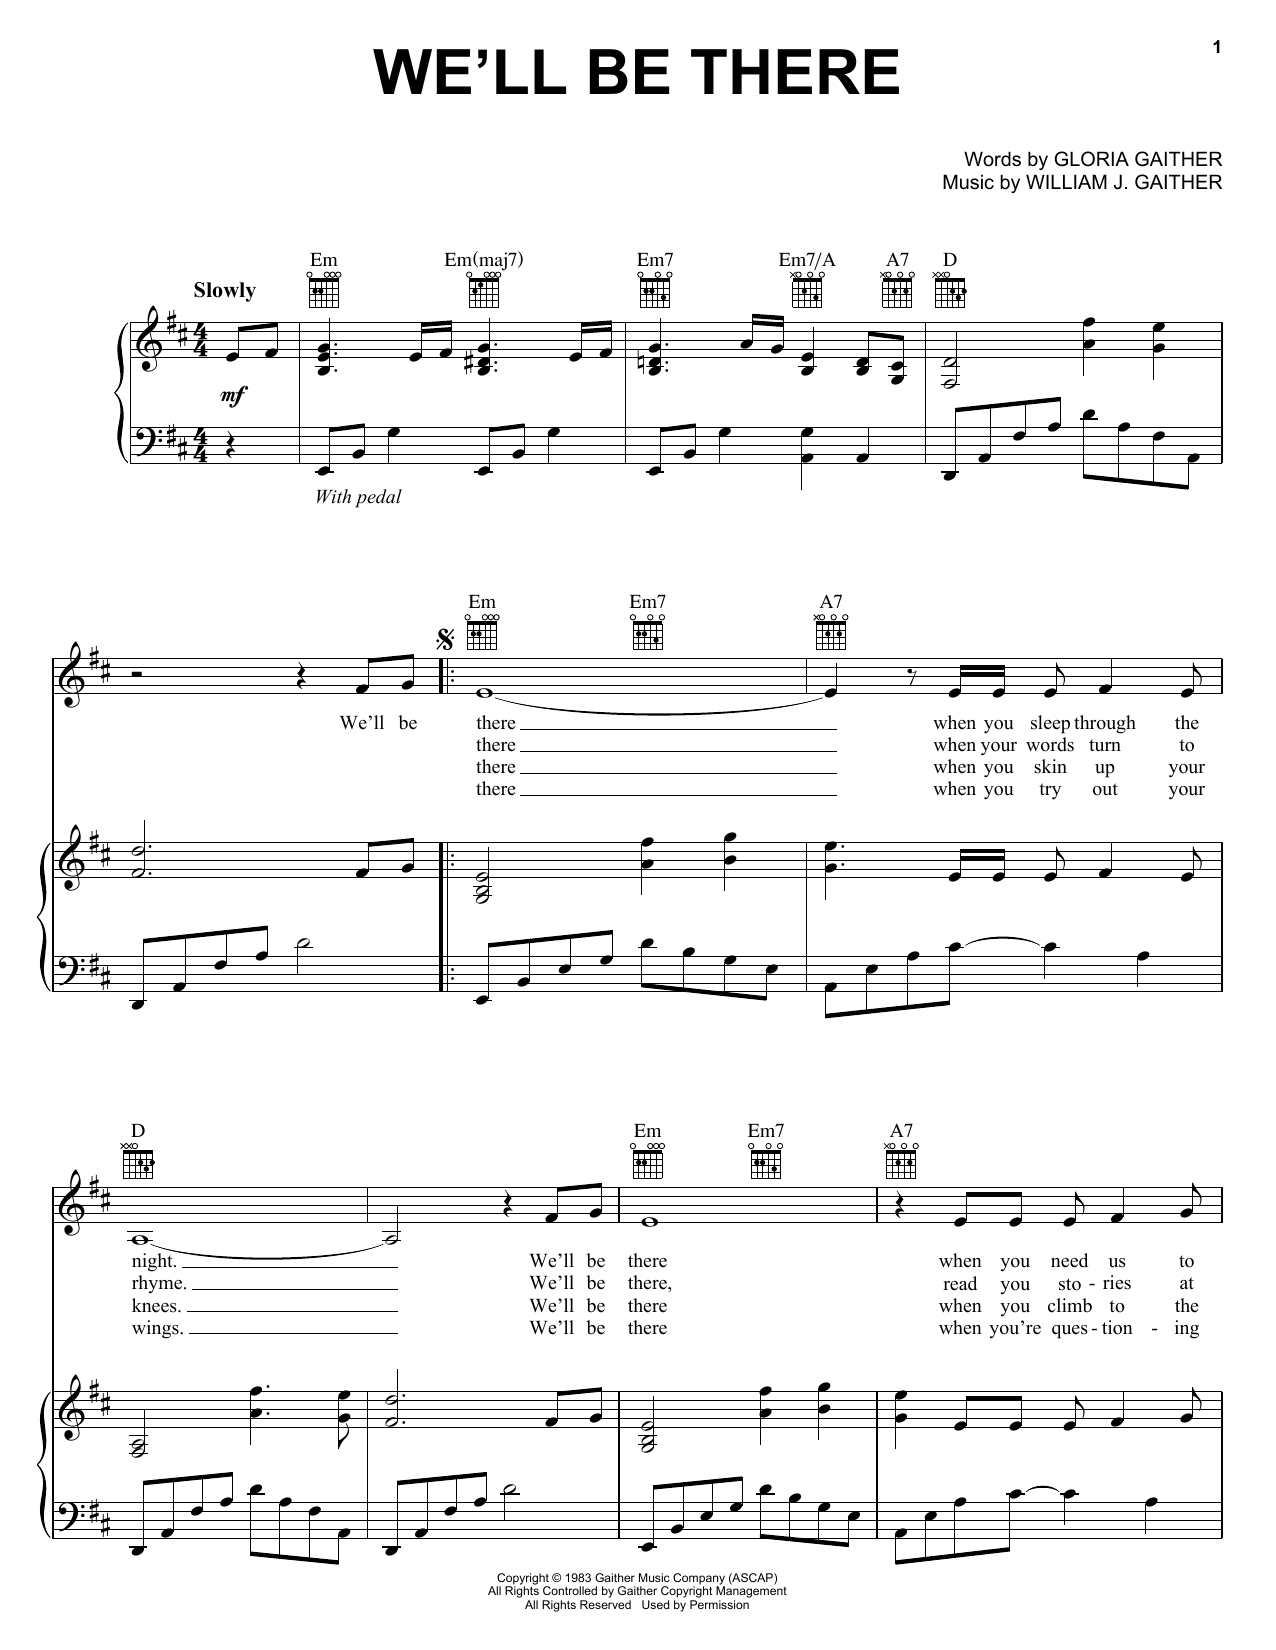 Download Bill & Gloria Gaither We'll Be There Sheet Music